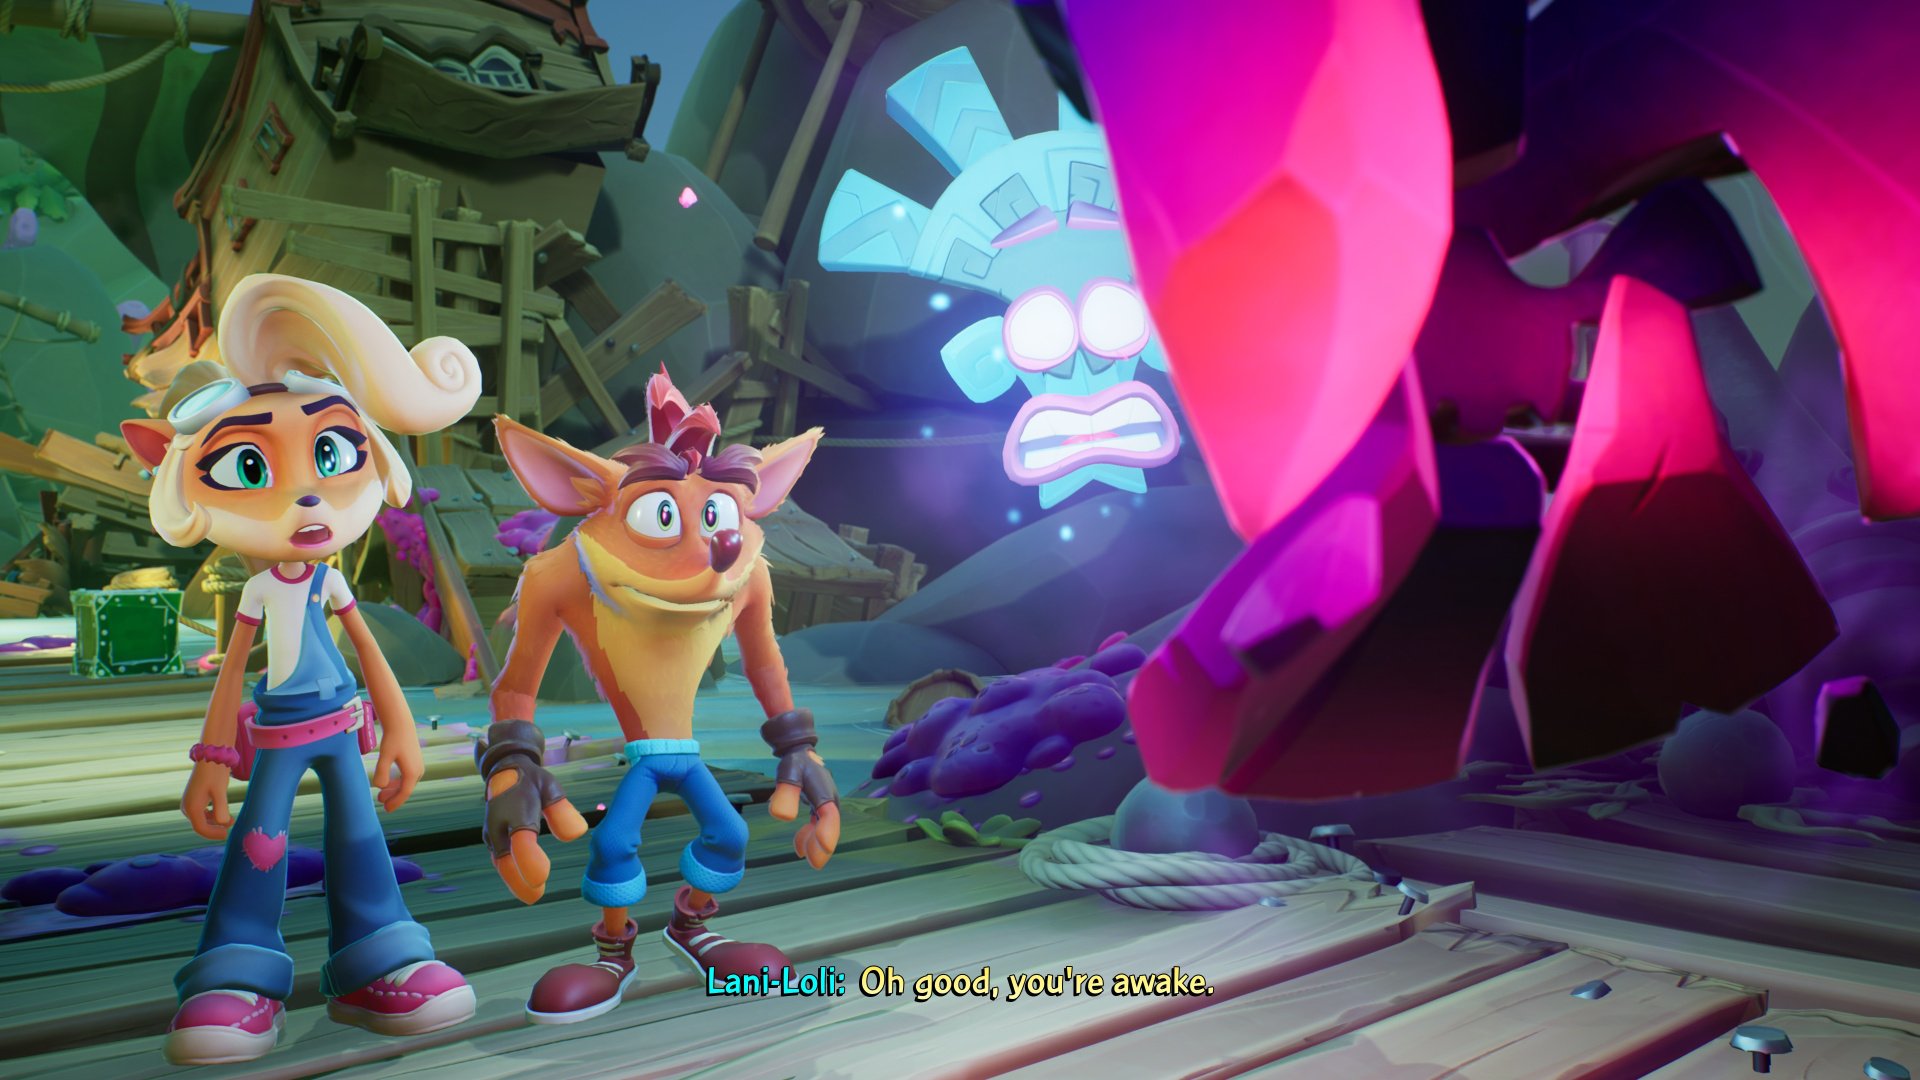 Crash Bandicoot 4: It's About Time Nintendo Switch review